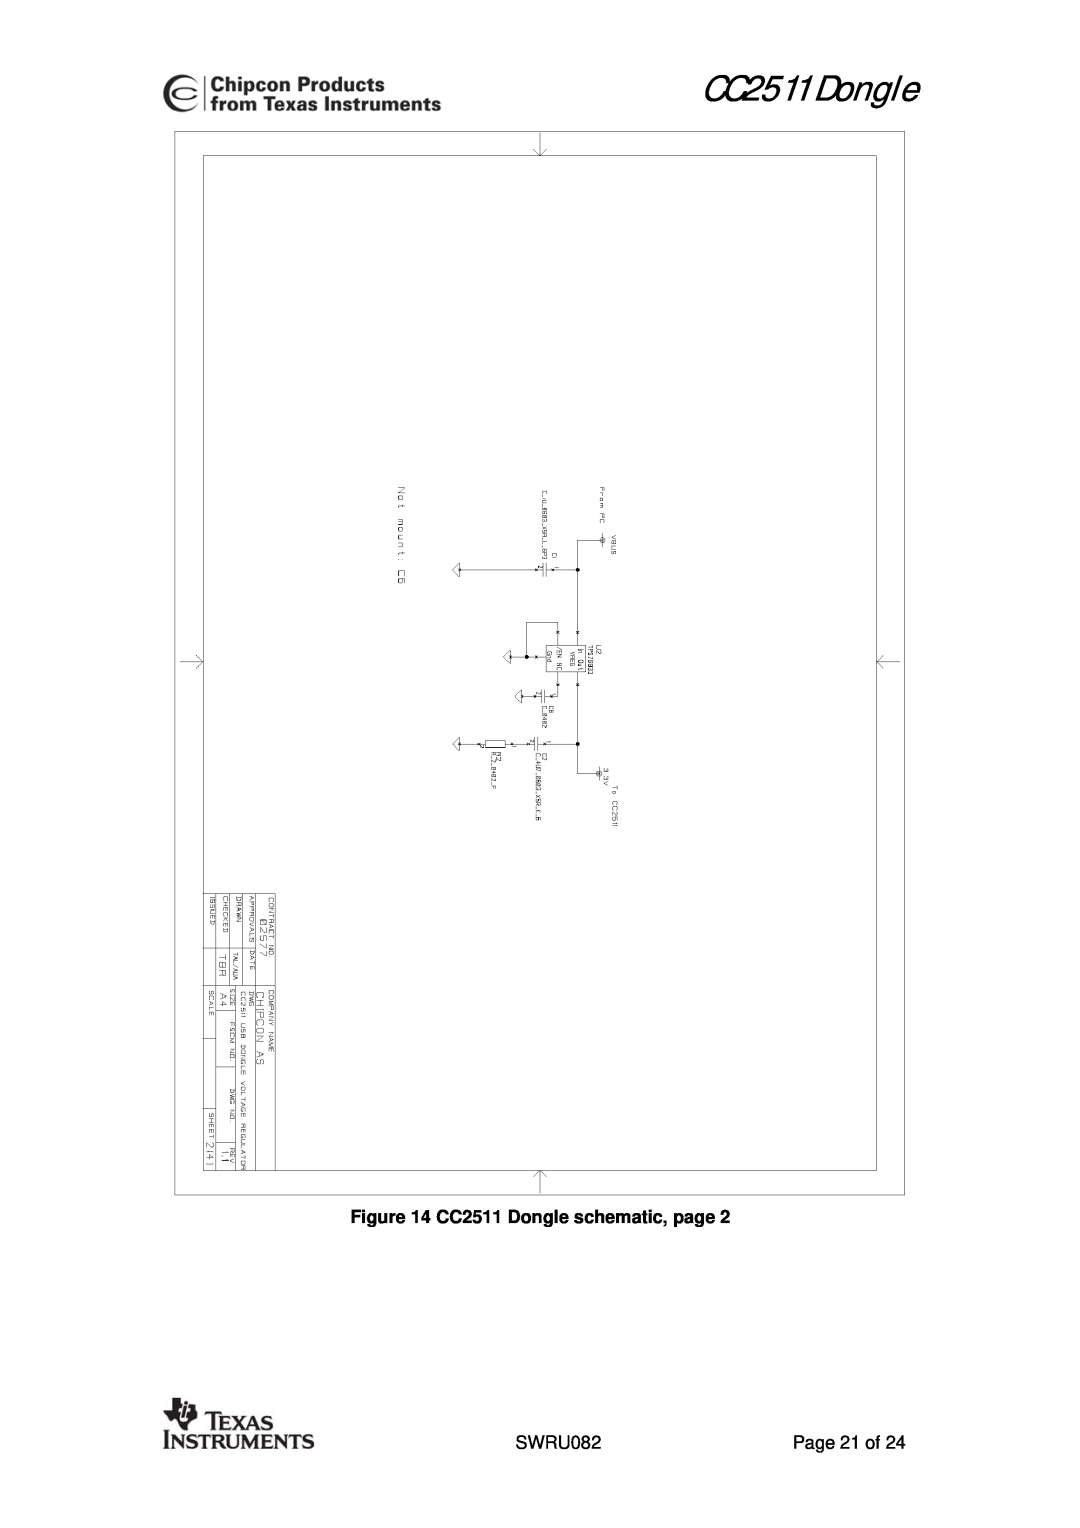 Texas Instruments user manual CC2511 Dongle schematic, page 